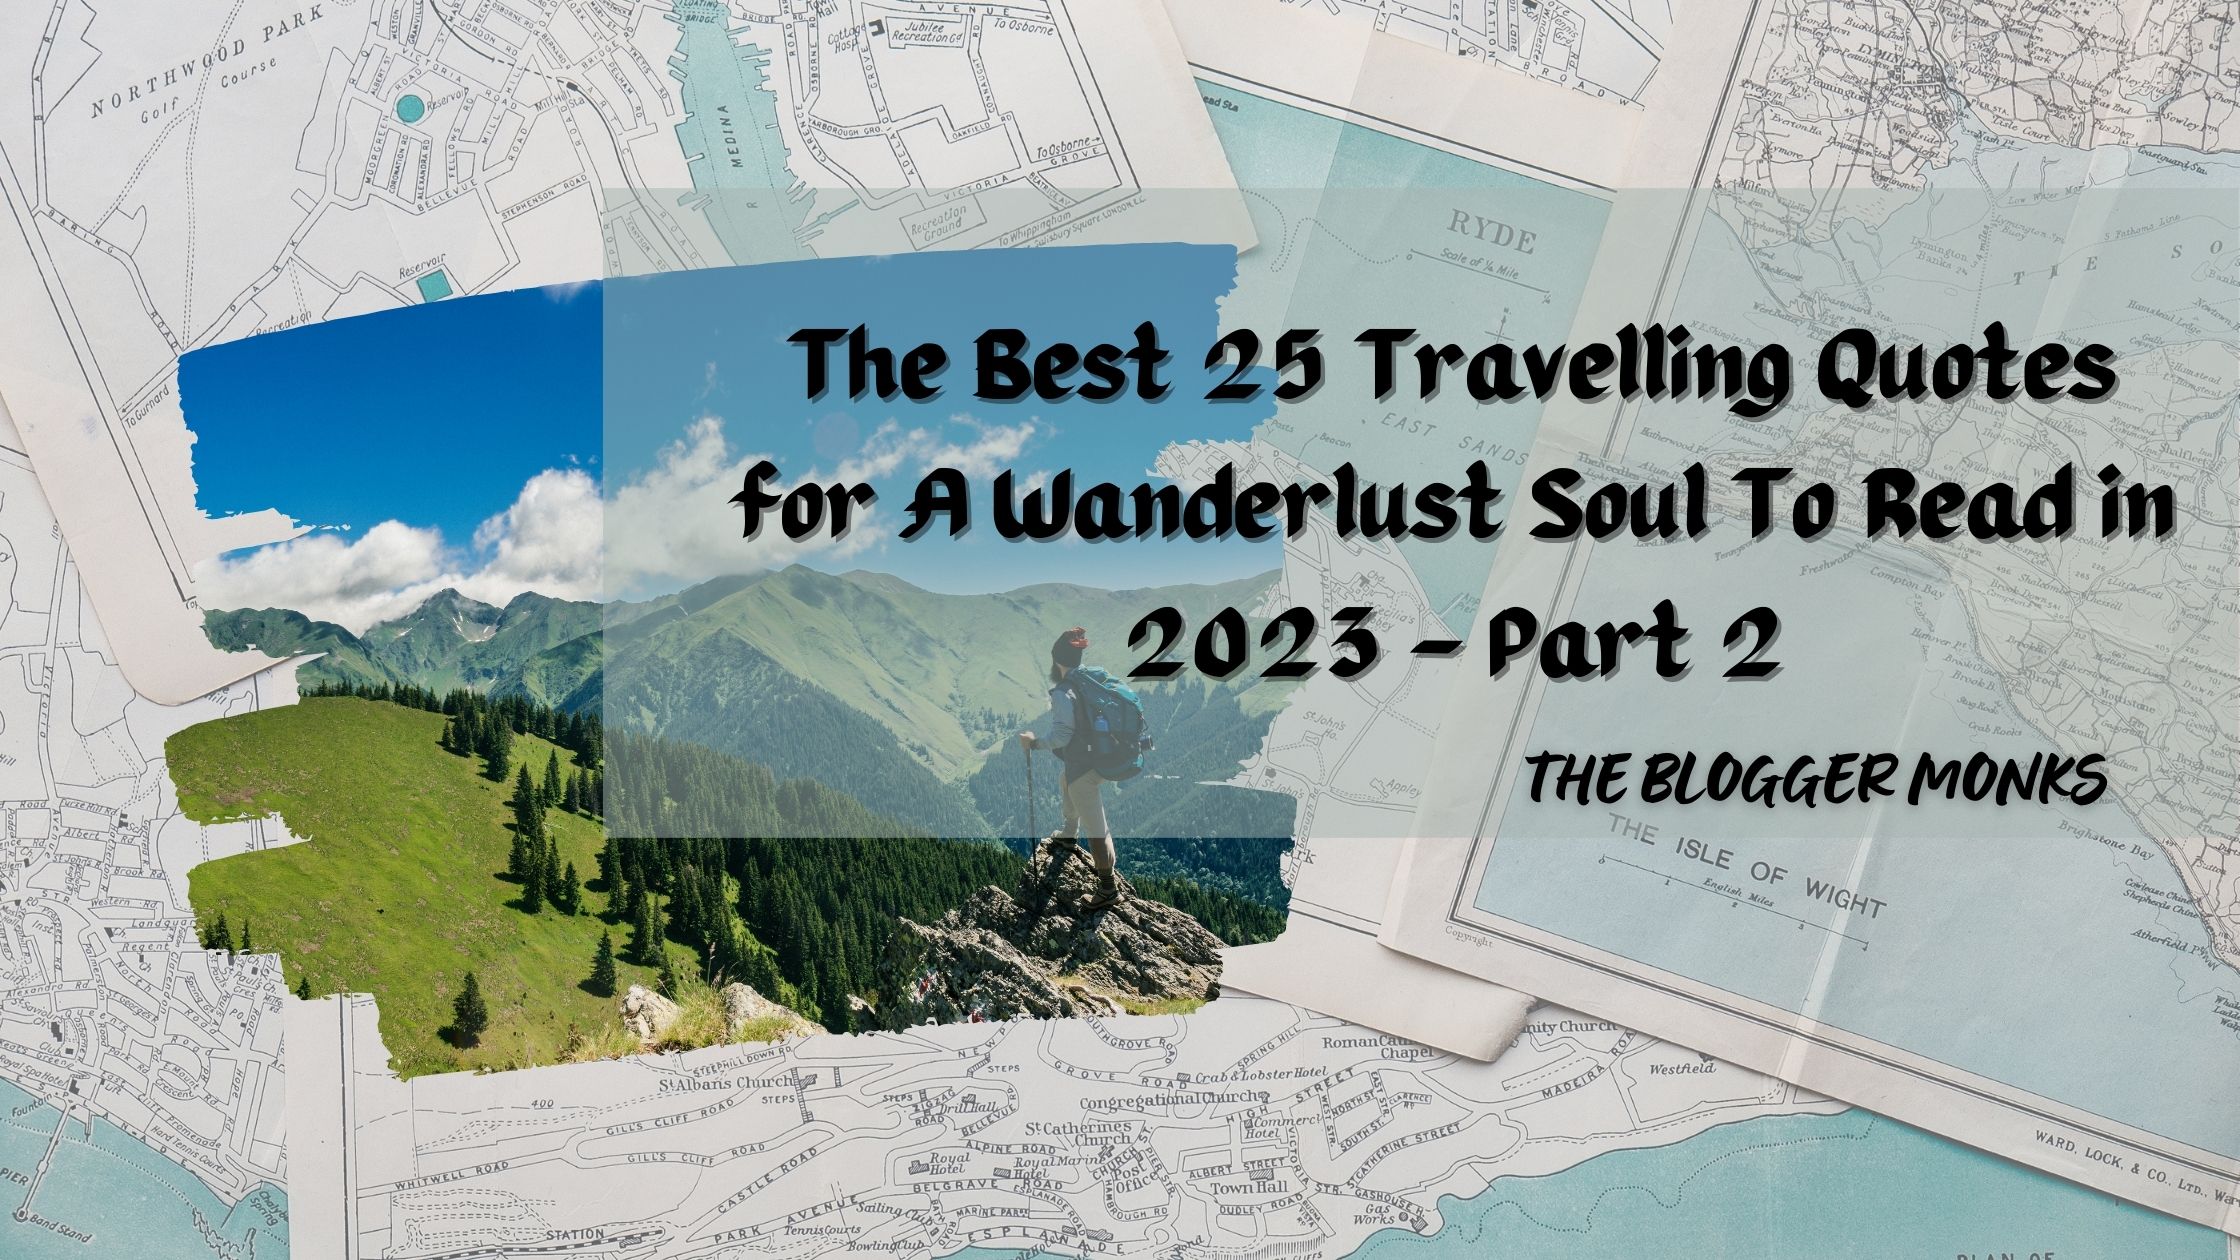 The Best 25 Travelling Quotes for A Wanderlust Soul To Read in 2023 - Part 2The Best 25 Travelling Quotes for A Wanderlust Soul To Read in 2023 - Part 2